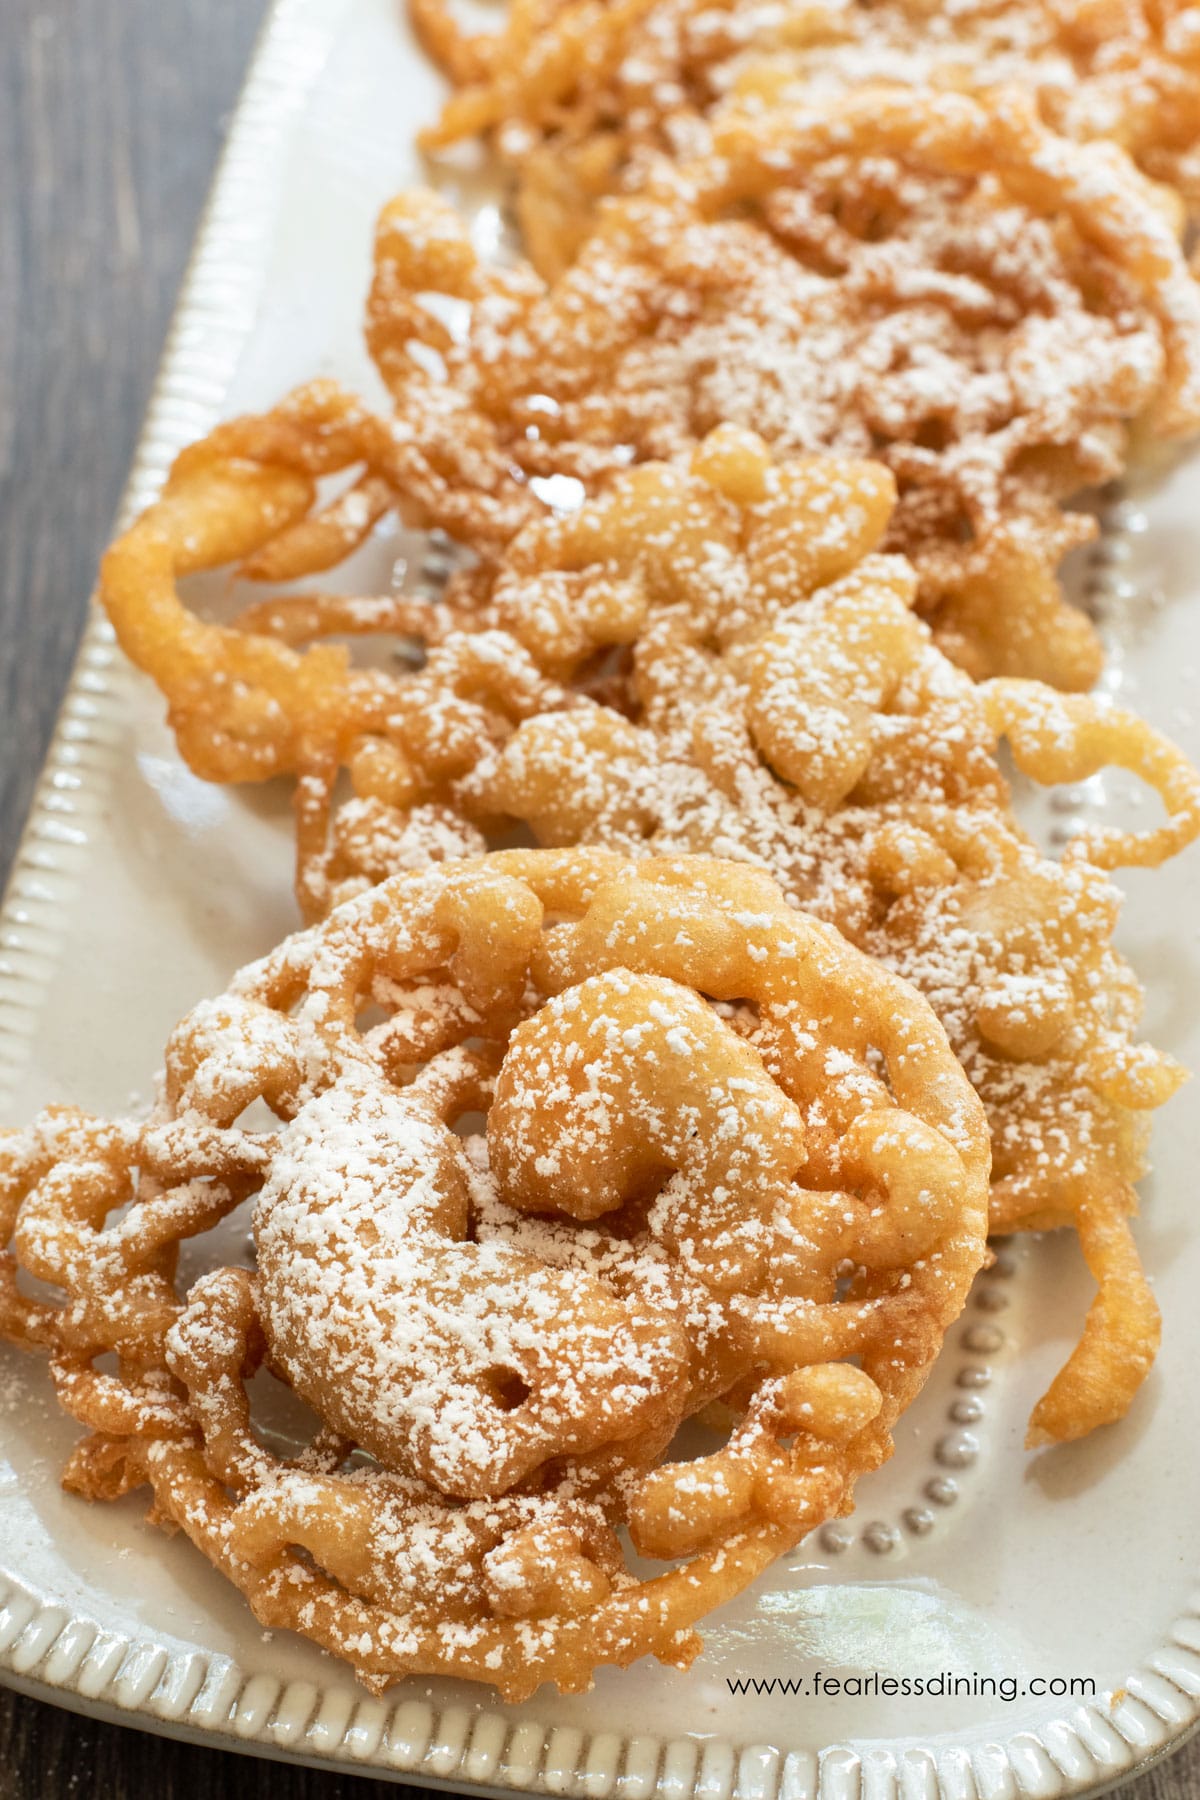 A photo of five sugar dusted funnel cakes on a small platter.